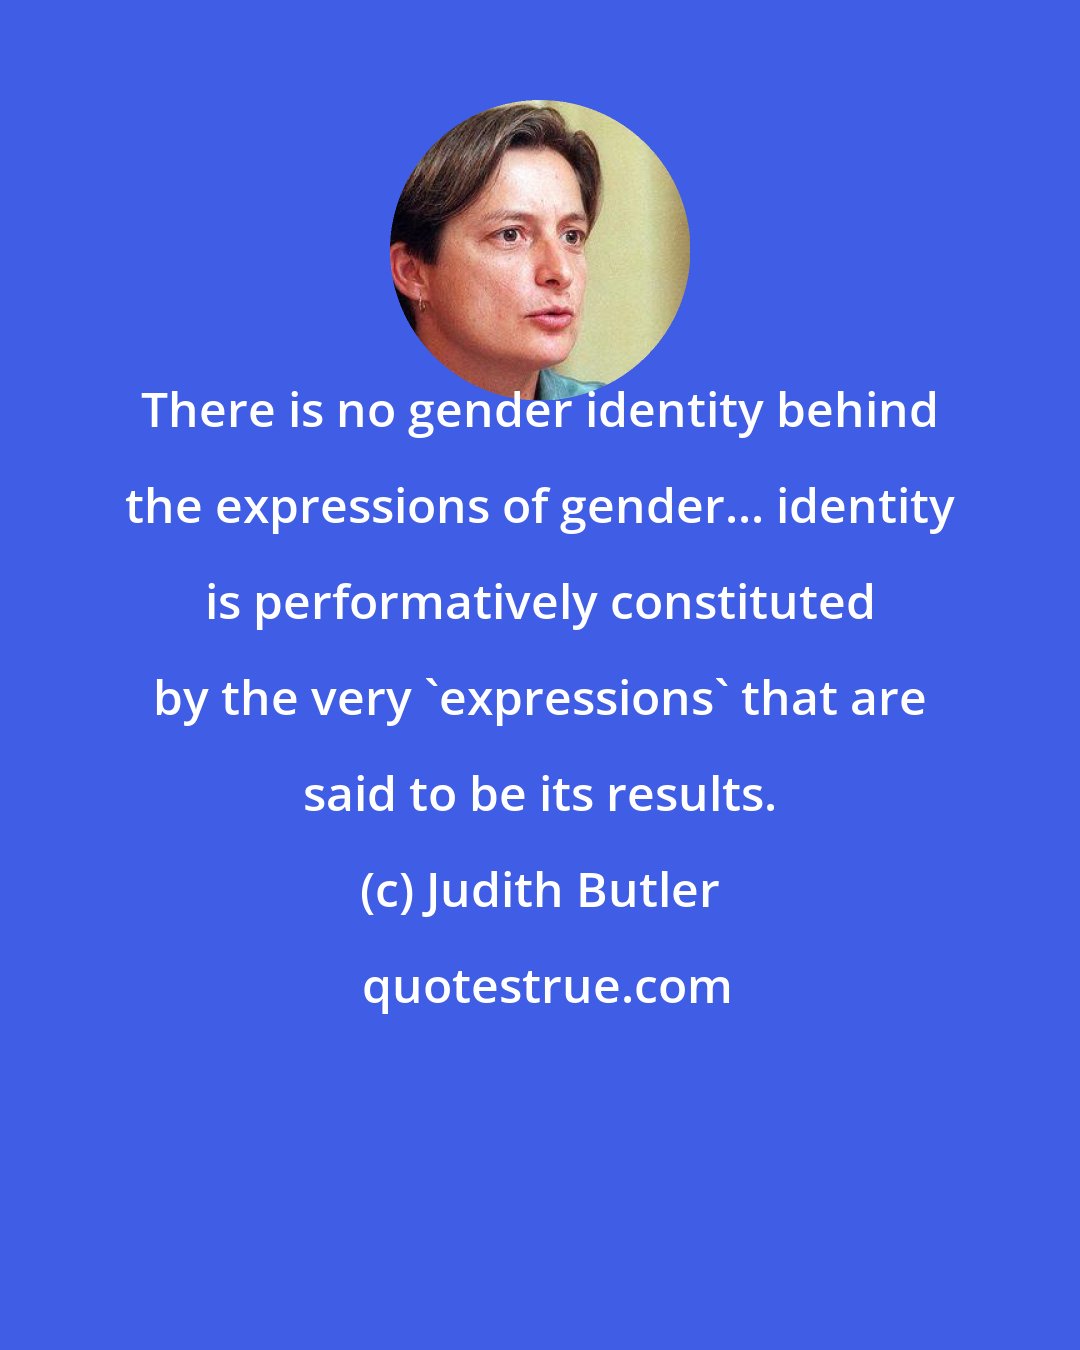 Judith Butler: There is no gender identity behind the expressions of gender... identity is performatively constituted by the very 'expressions' that are said to be its results.